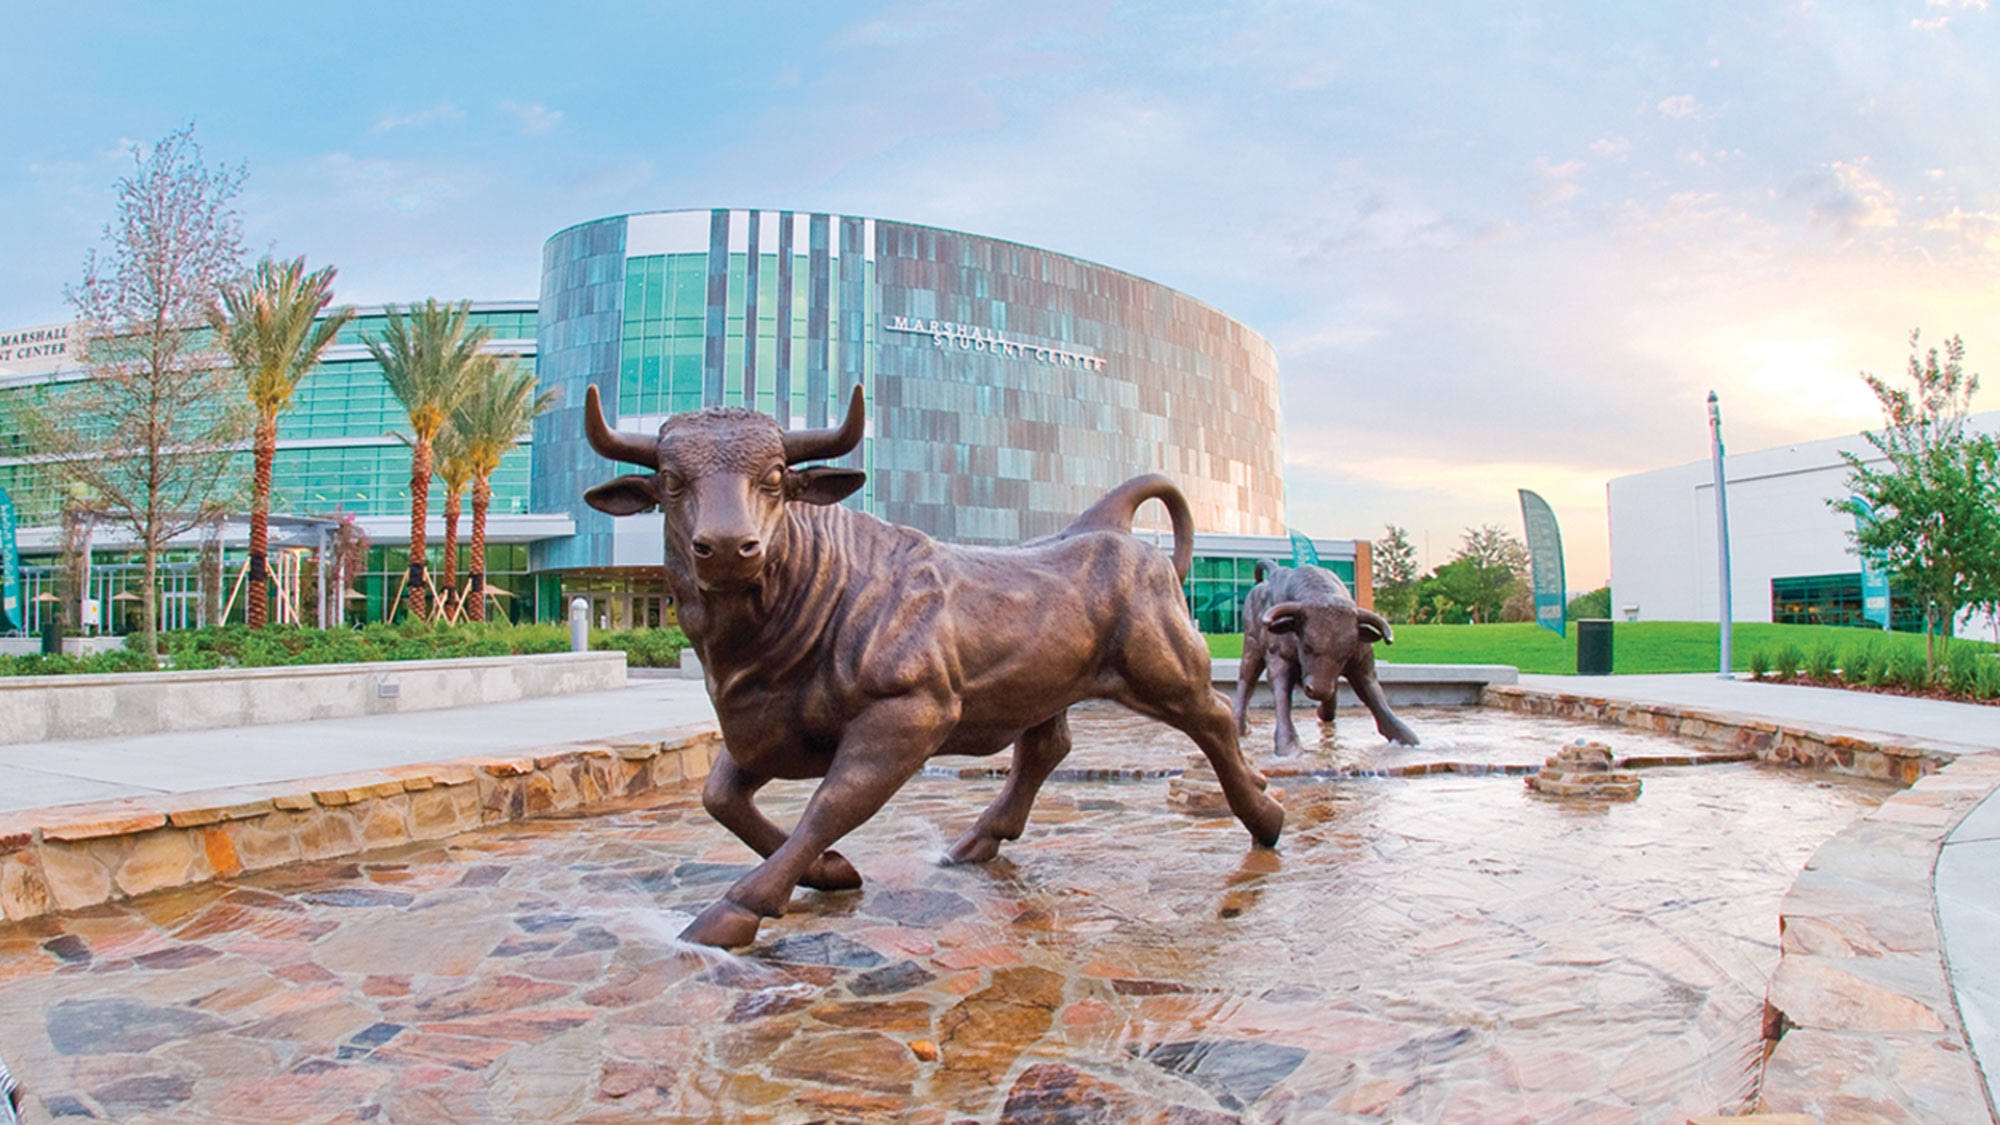 The impact of USF’s largest freshman class